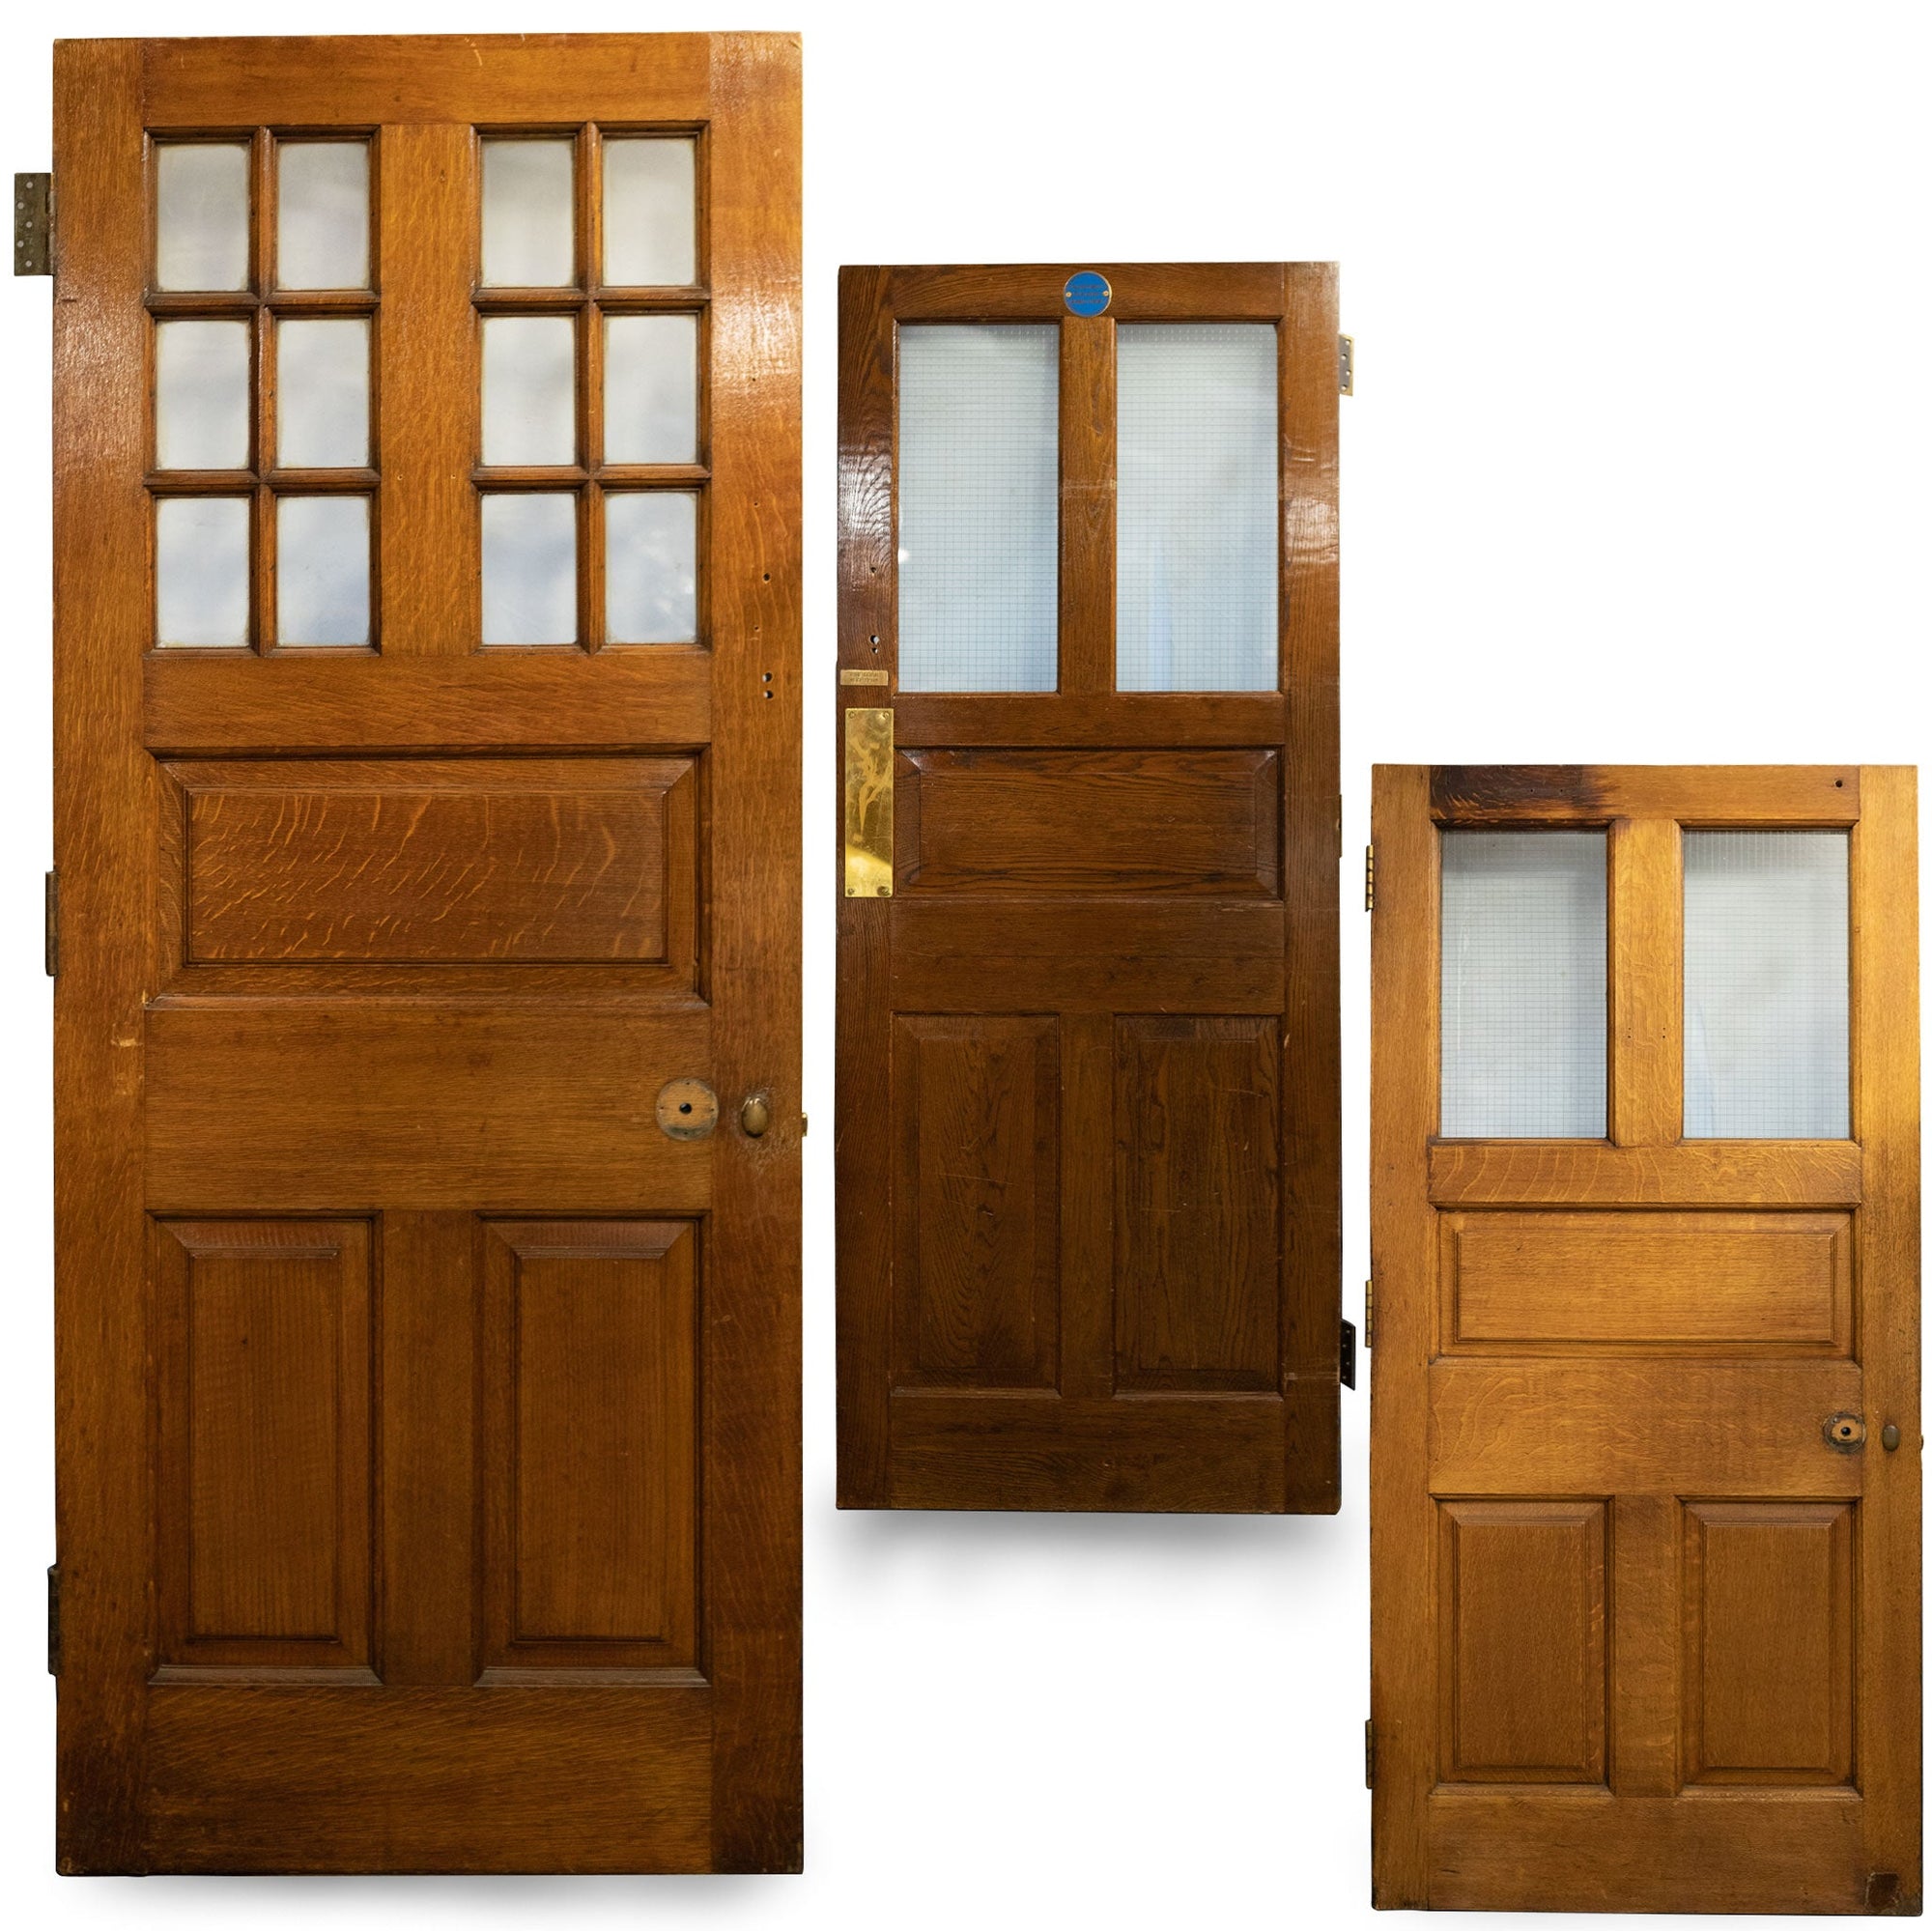 Glazed Oak Doors Reclaimed from Mercers' Hall London | The Architectural Forum